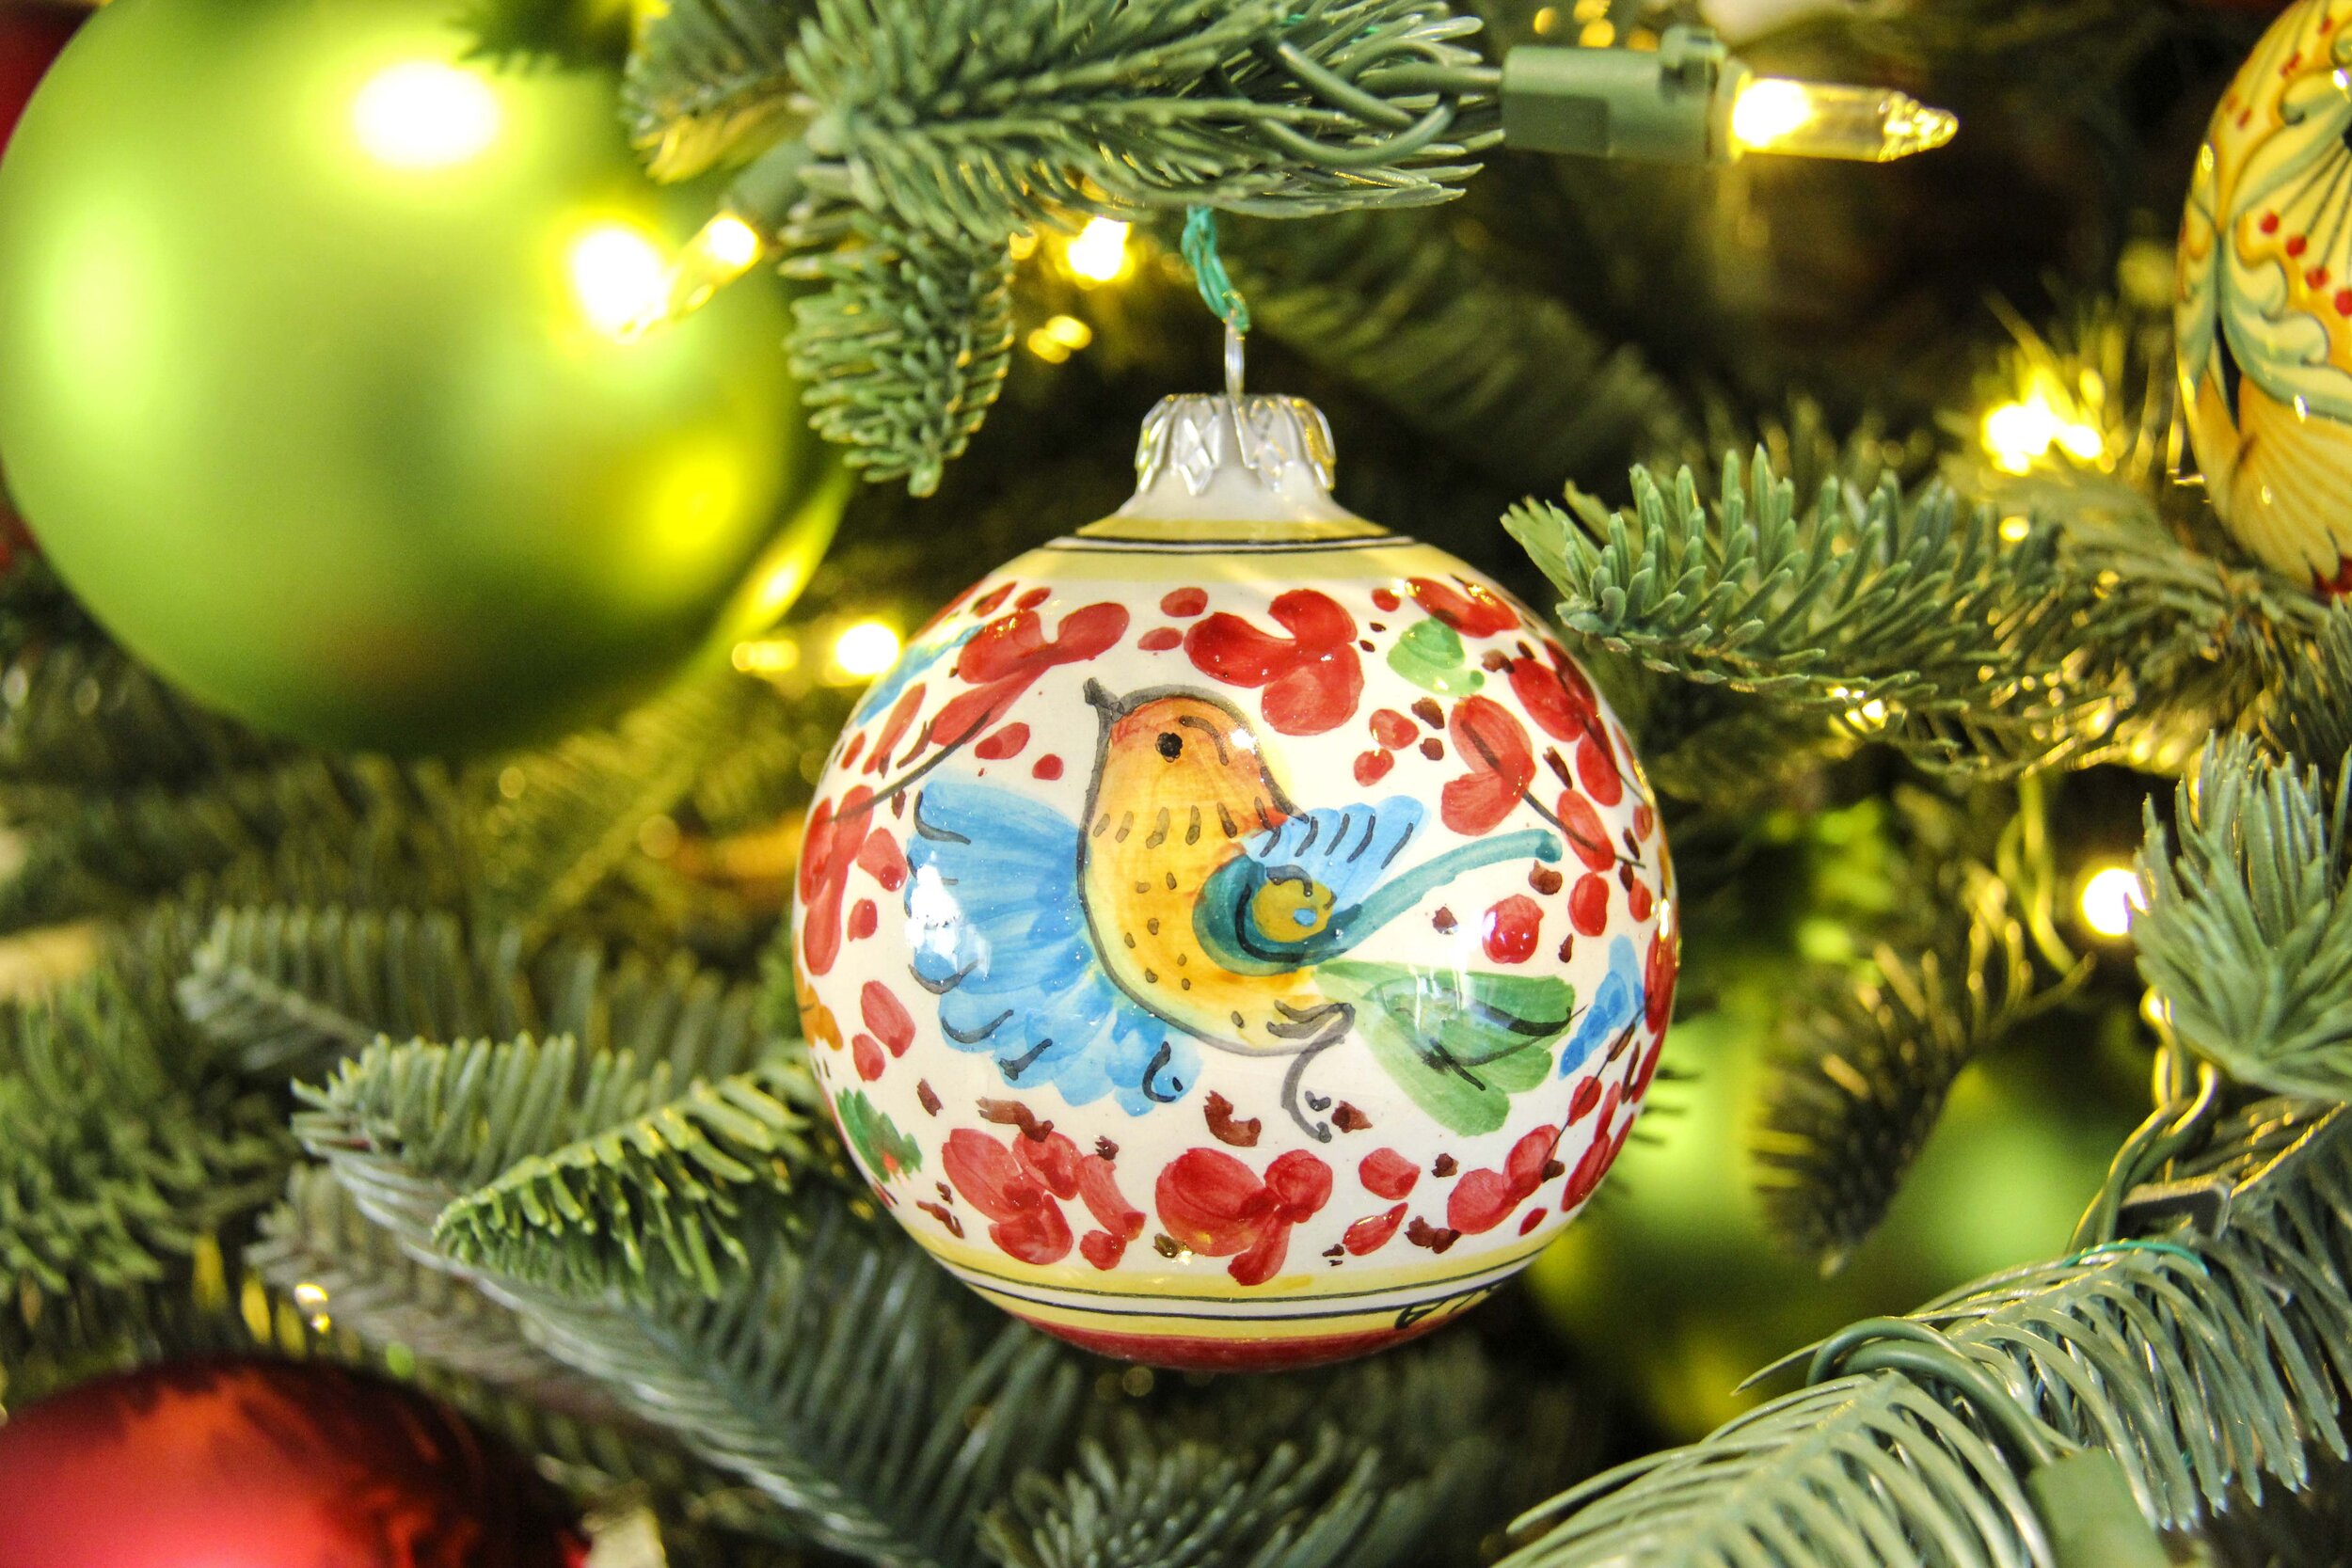 Round ornament painted with a bird design on a tree